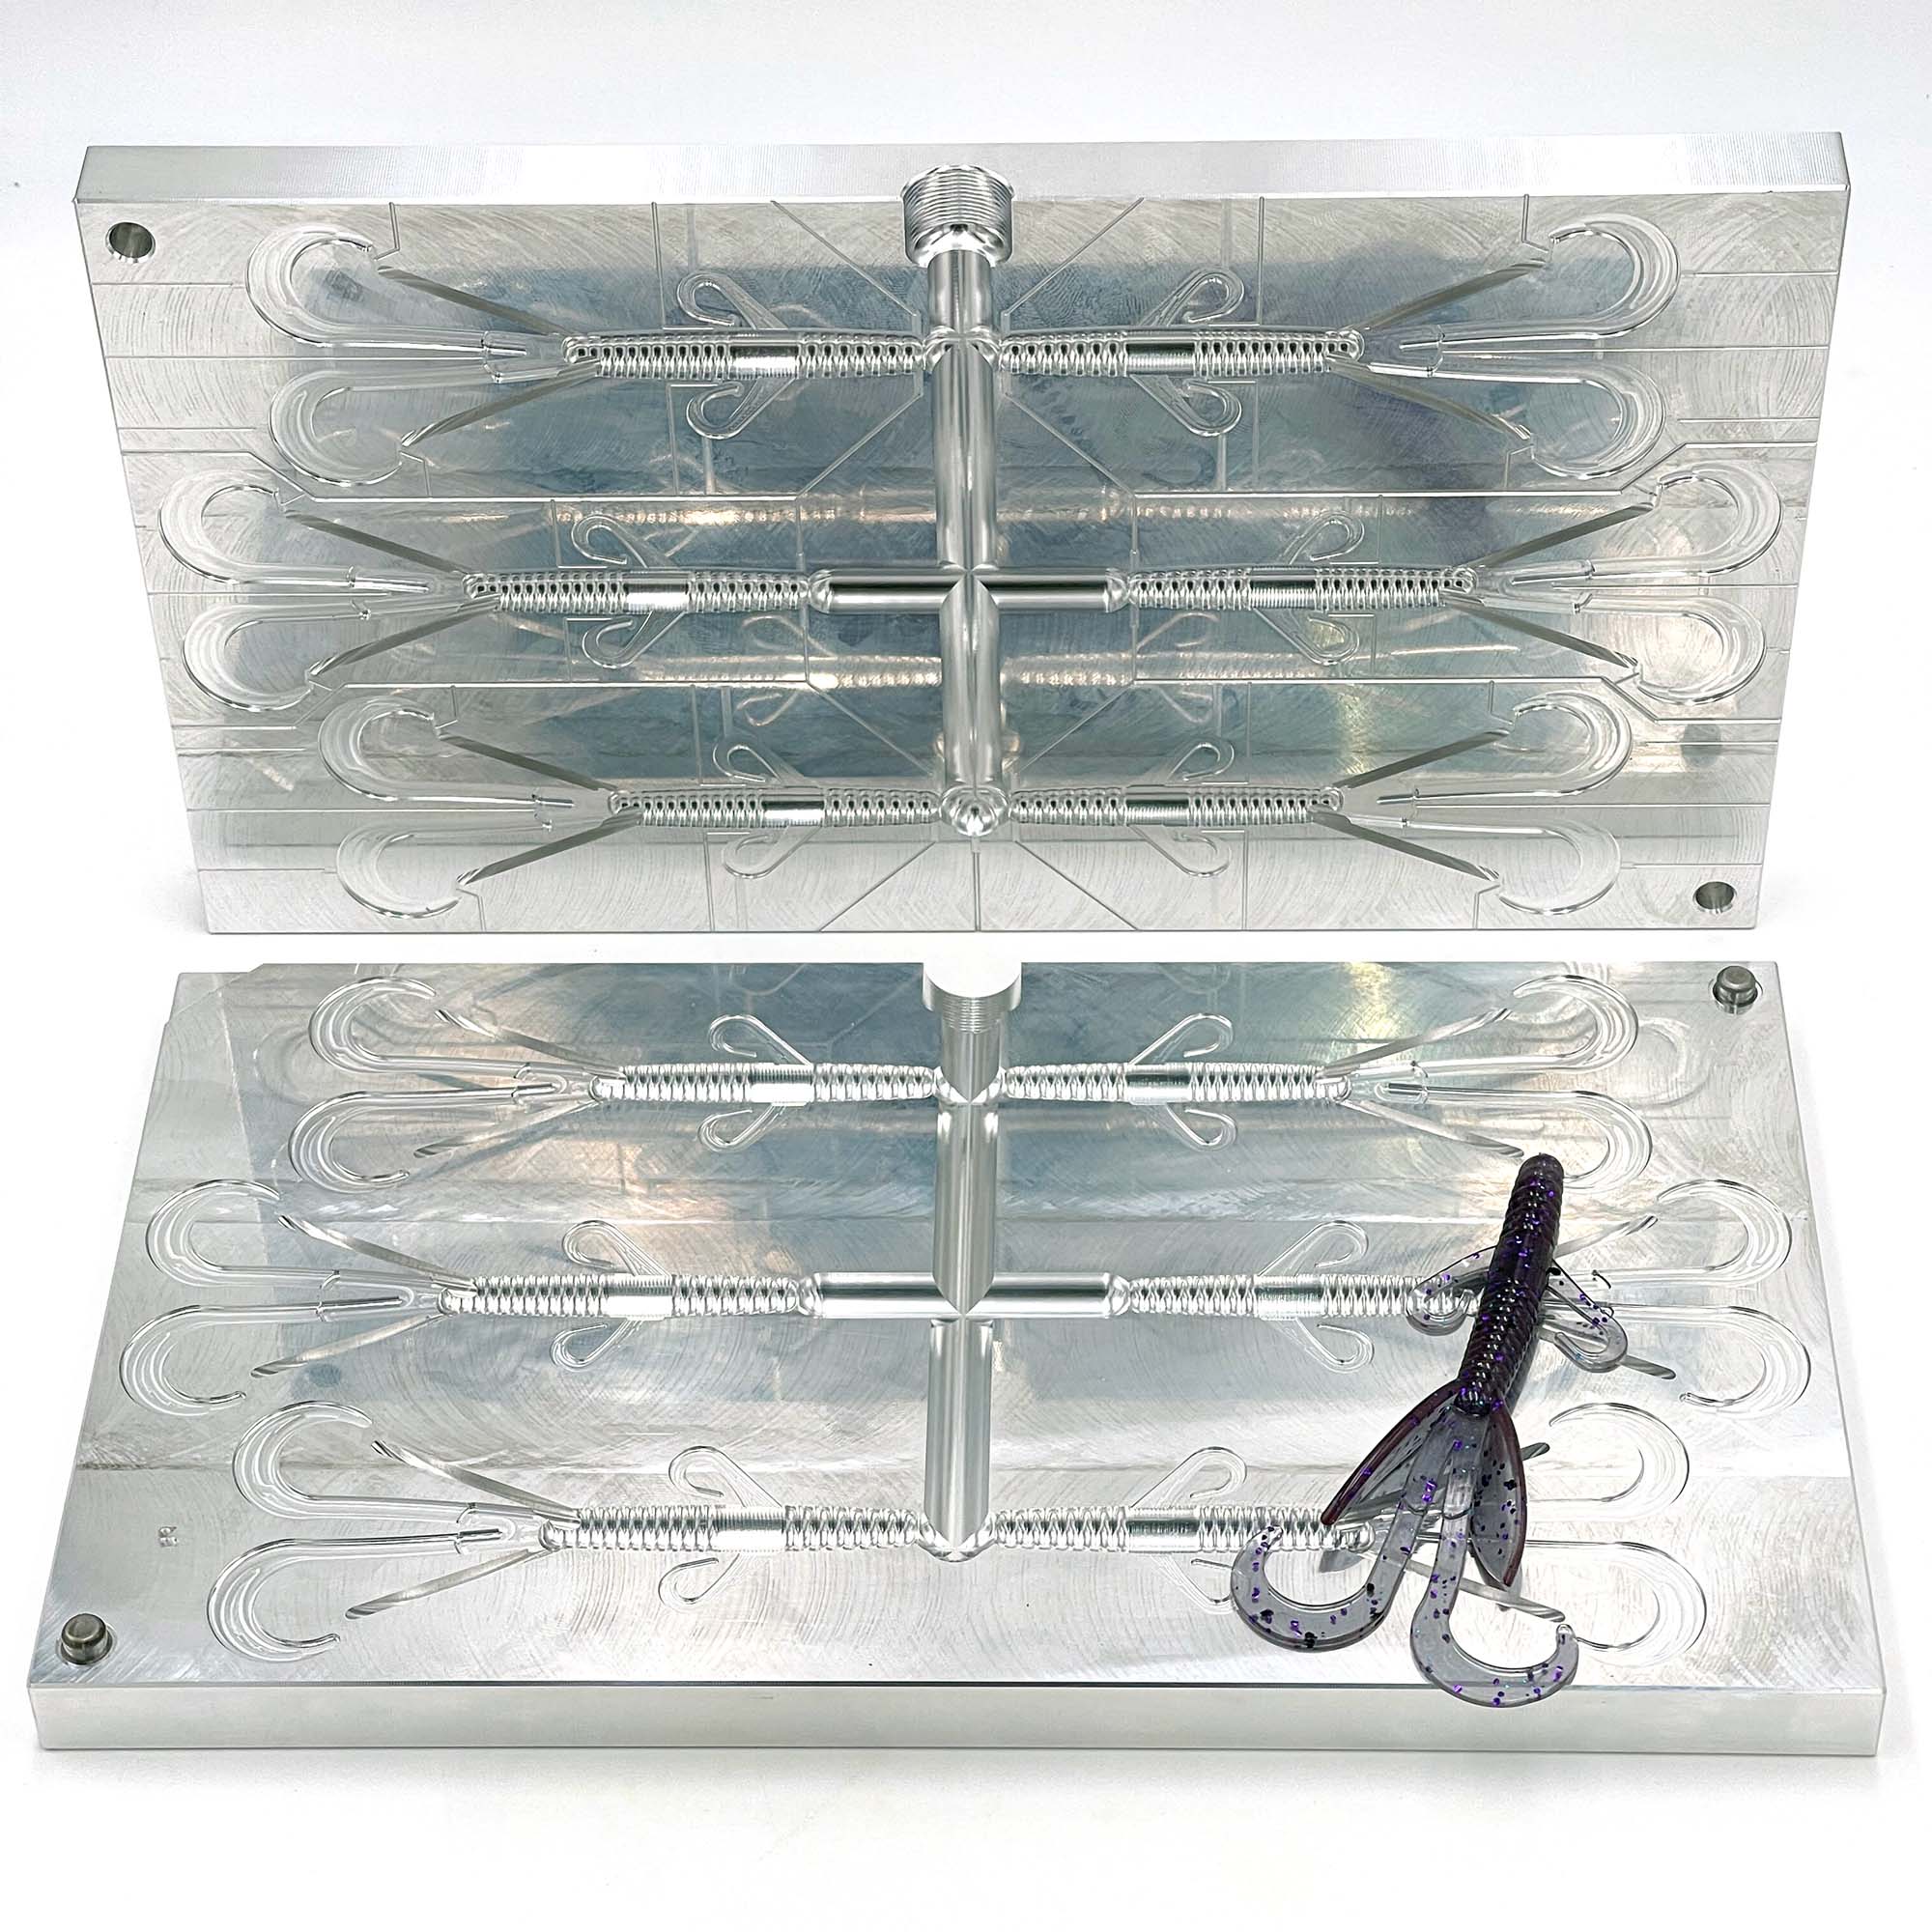 5 Inch Hawg Hand Injection Mold – Epic Bait Molds